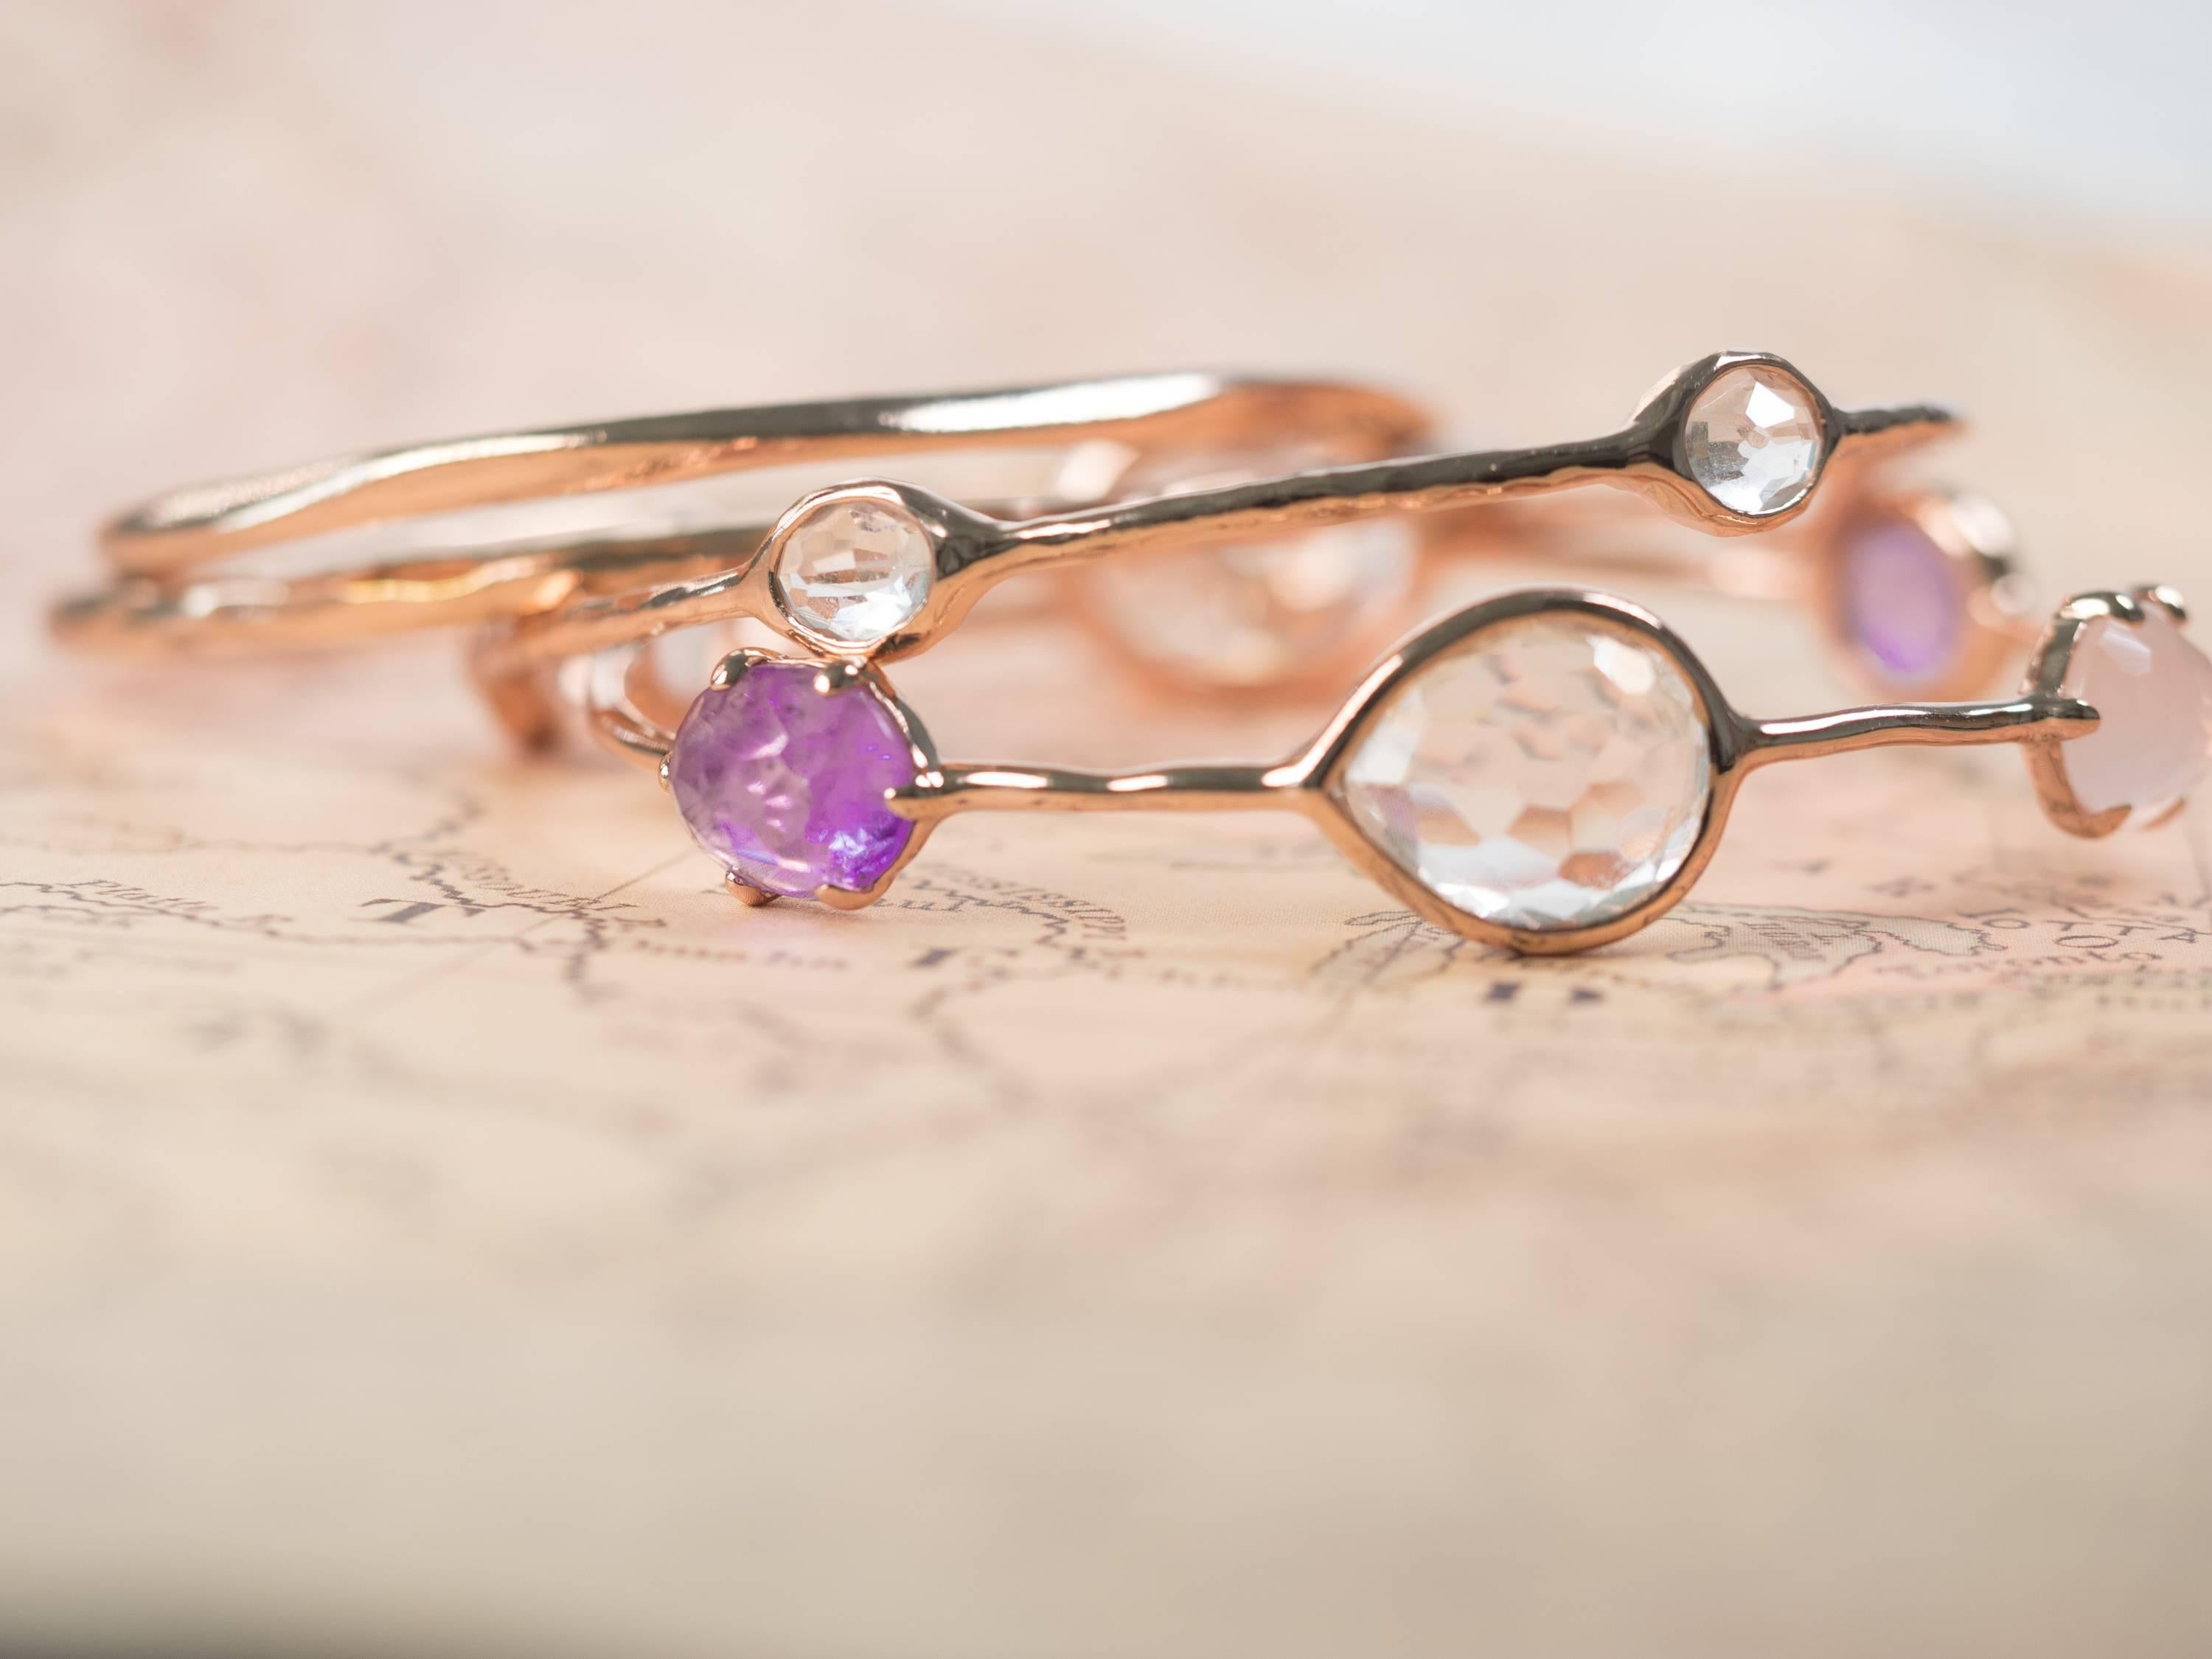 This beautiful, modern Ippolita Rose Collection bangle set features 4 bangle bracelets made from sterling silver plated with 18 karat rose gold. The stones are amethyst and clear quartz. The bracelets measure 2 1/4 inches from side to side.